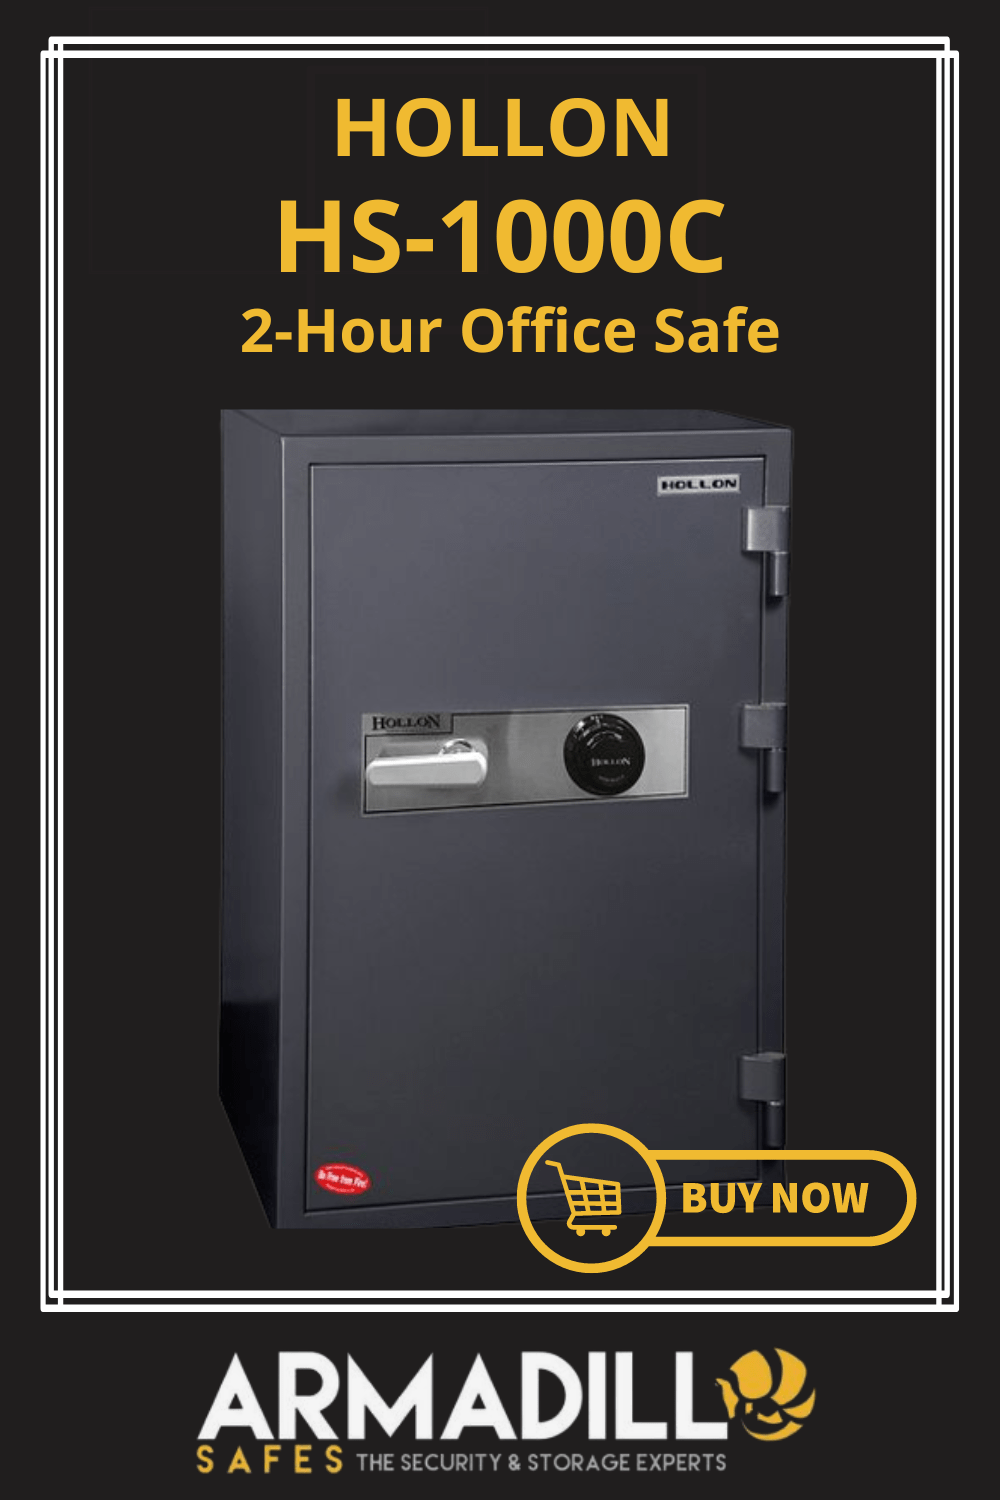 Hollon HS-1000C 2-Hour Office Safe Armadillo Safe and Vault